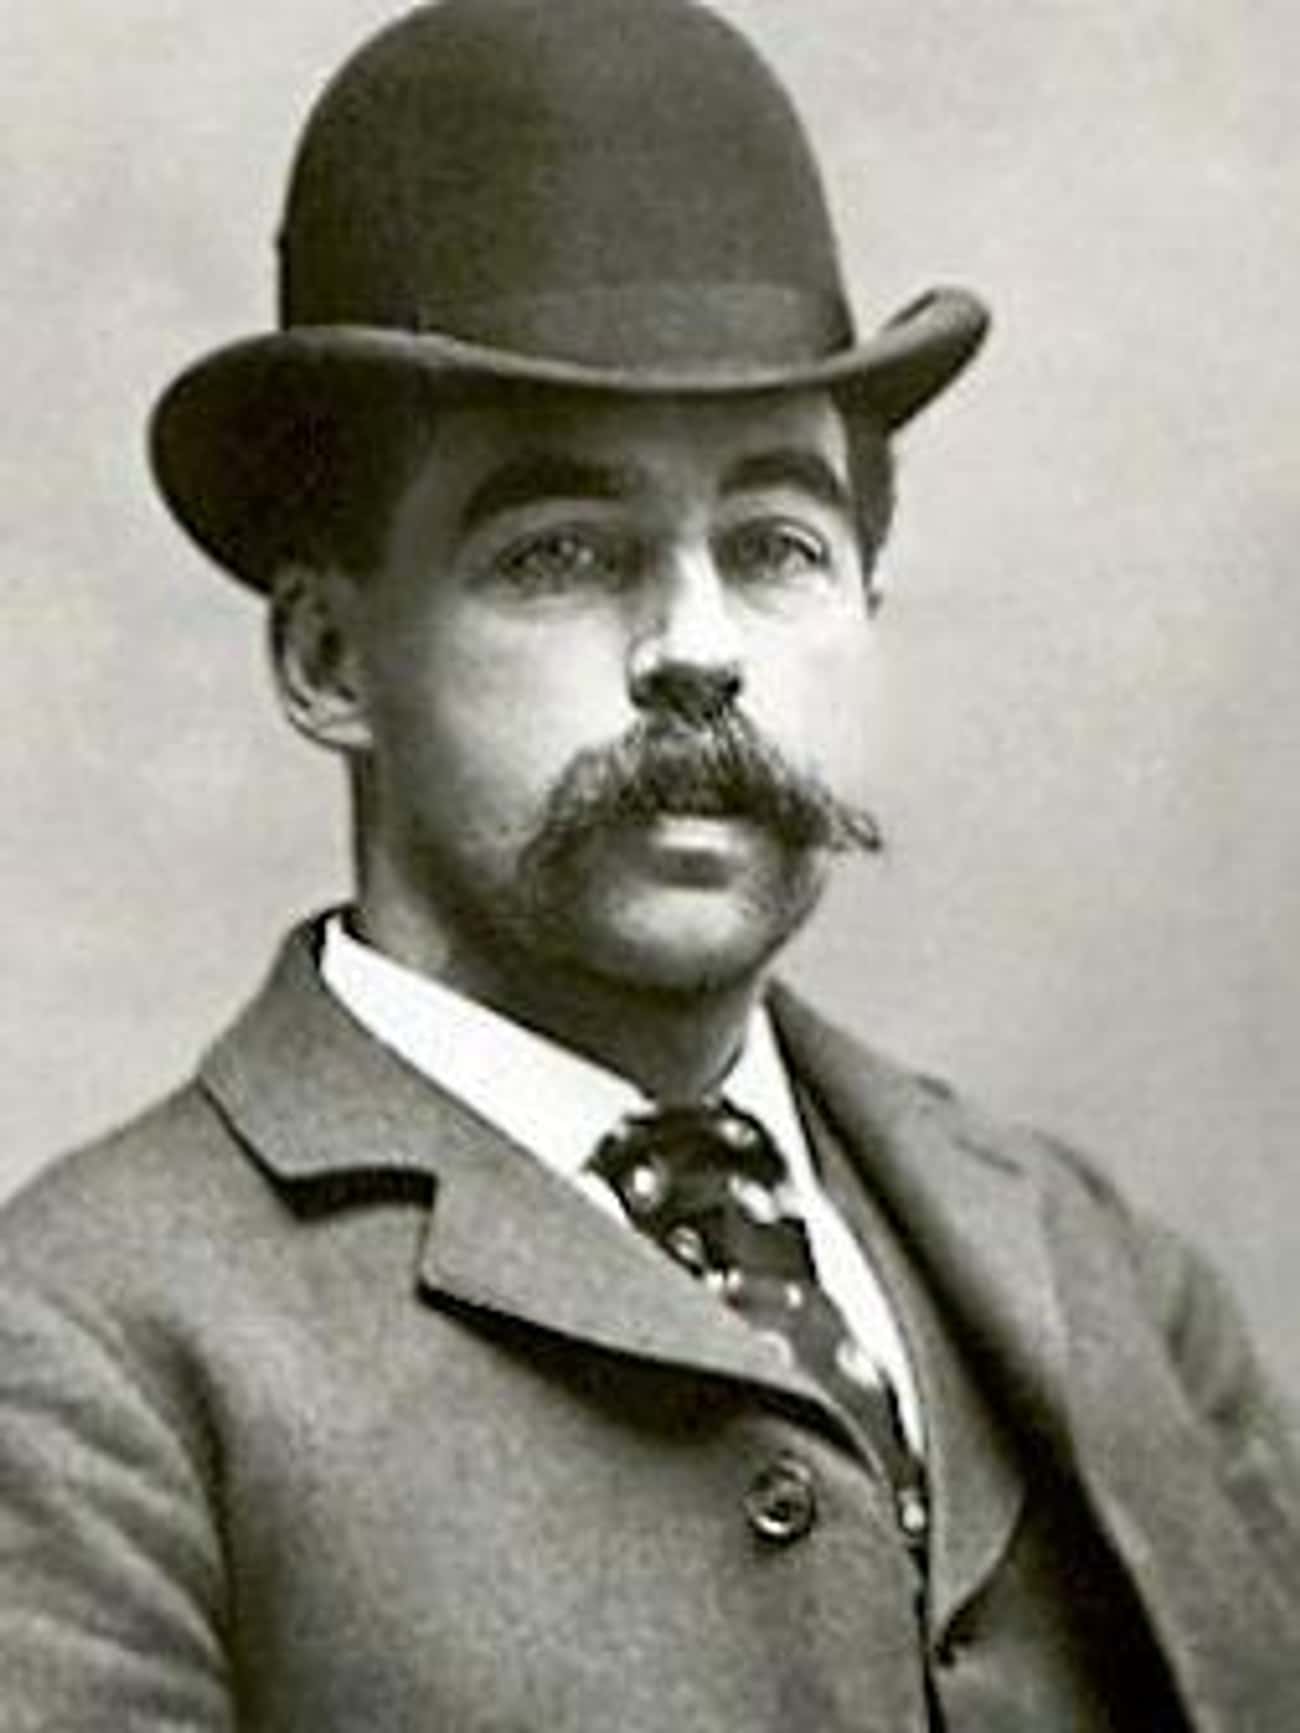 H.H. Holmes Was Done In By An Outstanding Warrant For Horse Theft